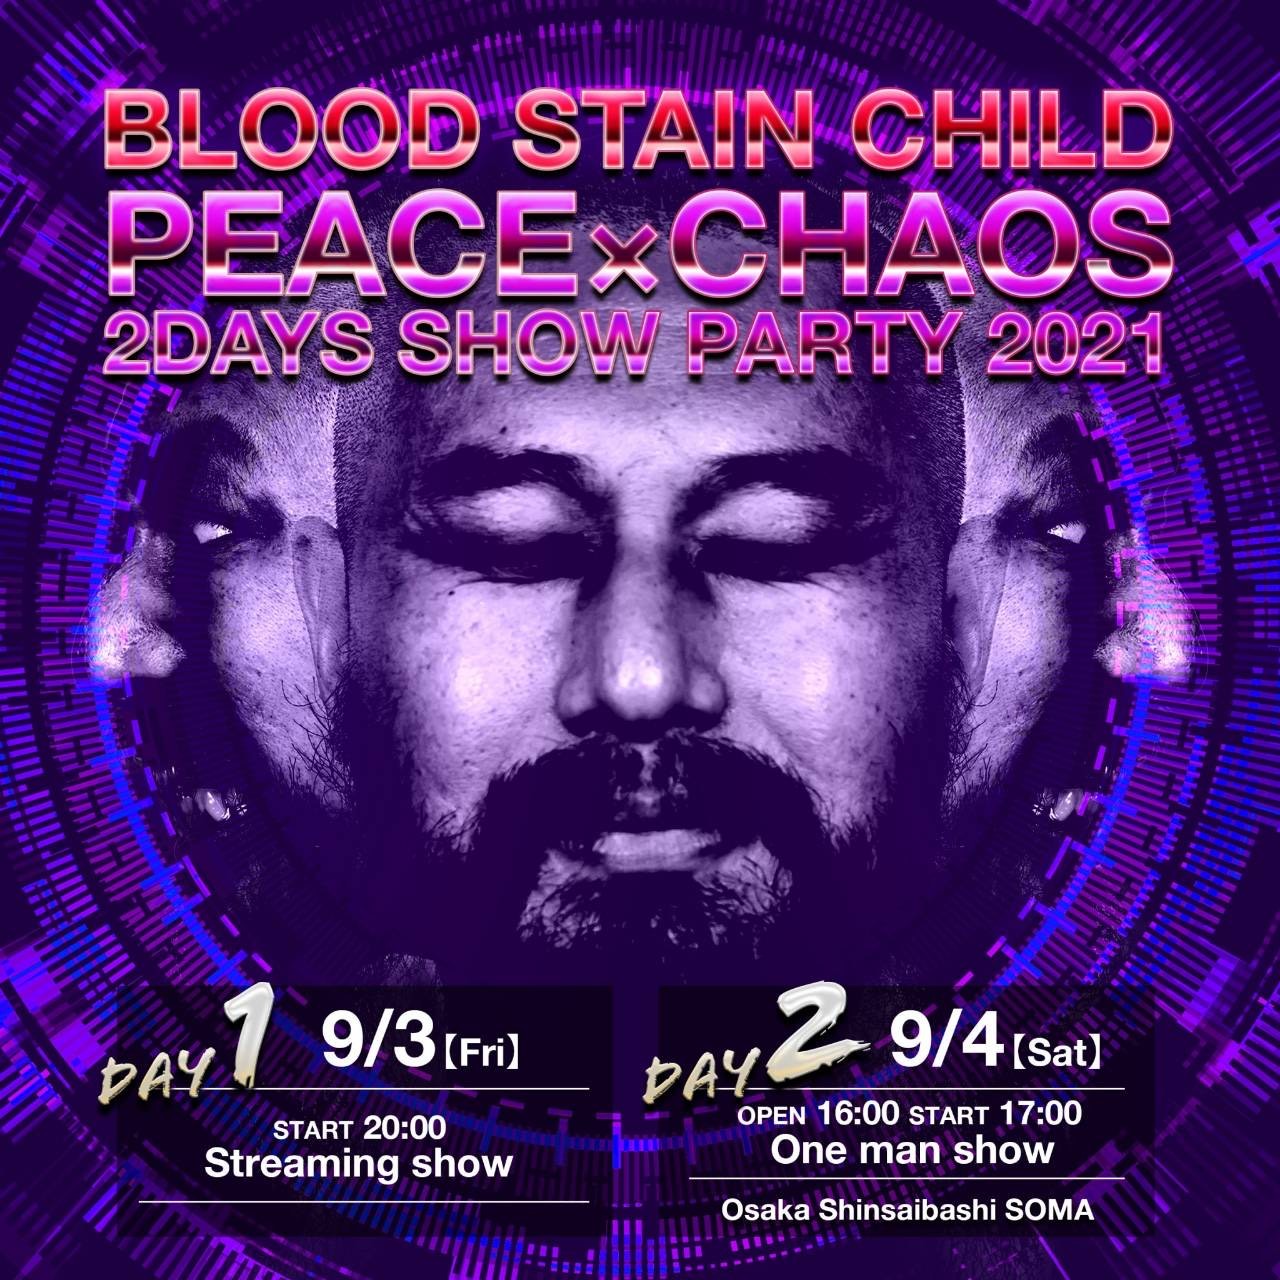 BLOOD STAIN CHILD 2DAYS SHOW PARTY 2021 "PEACE × CHAOS"